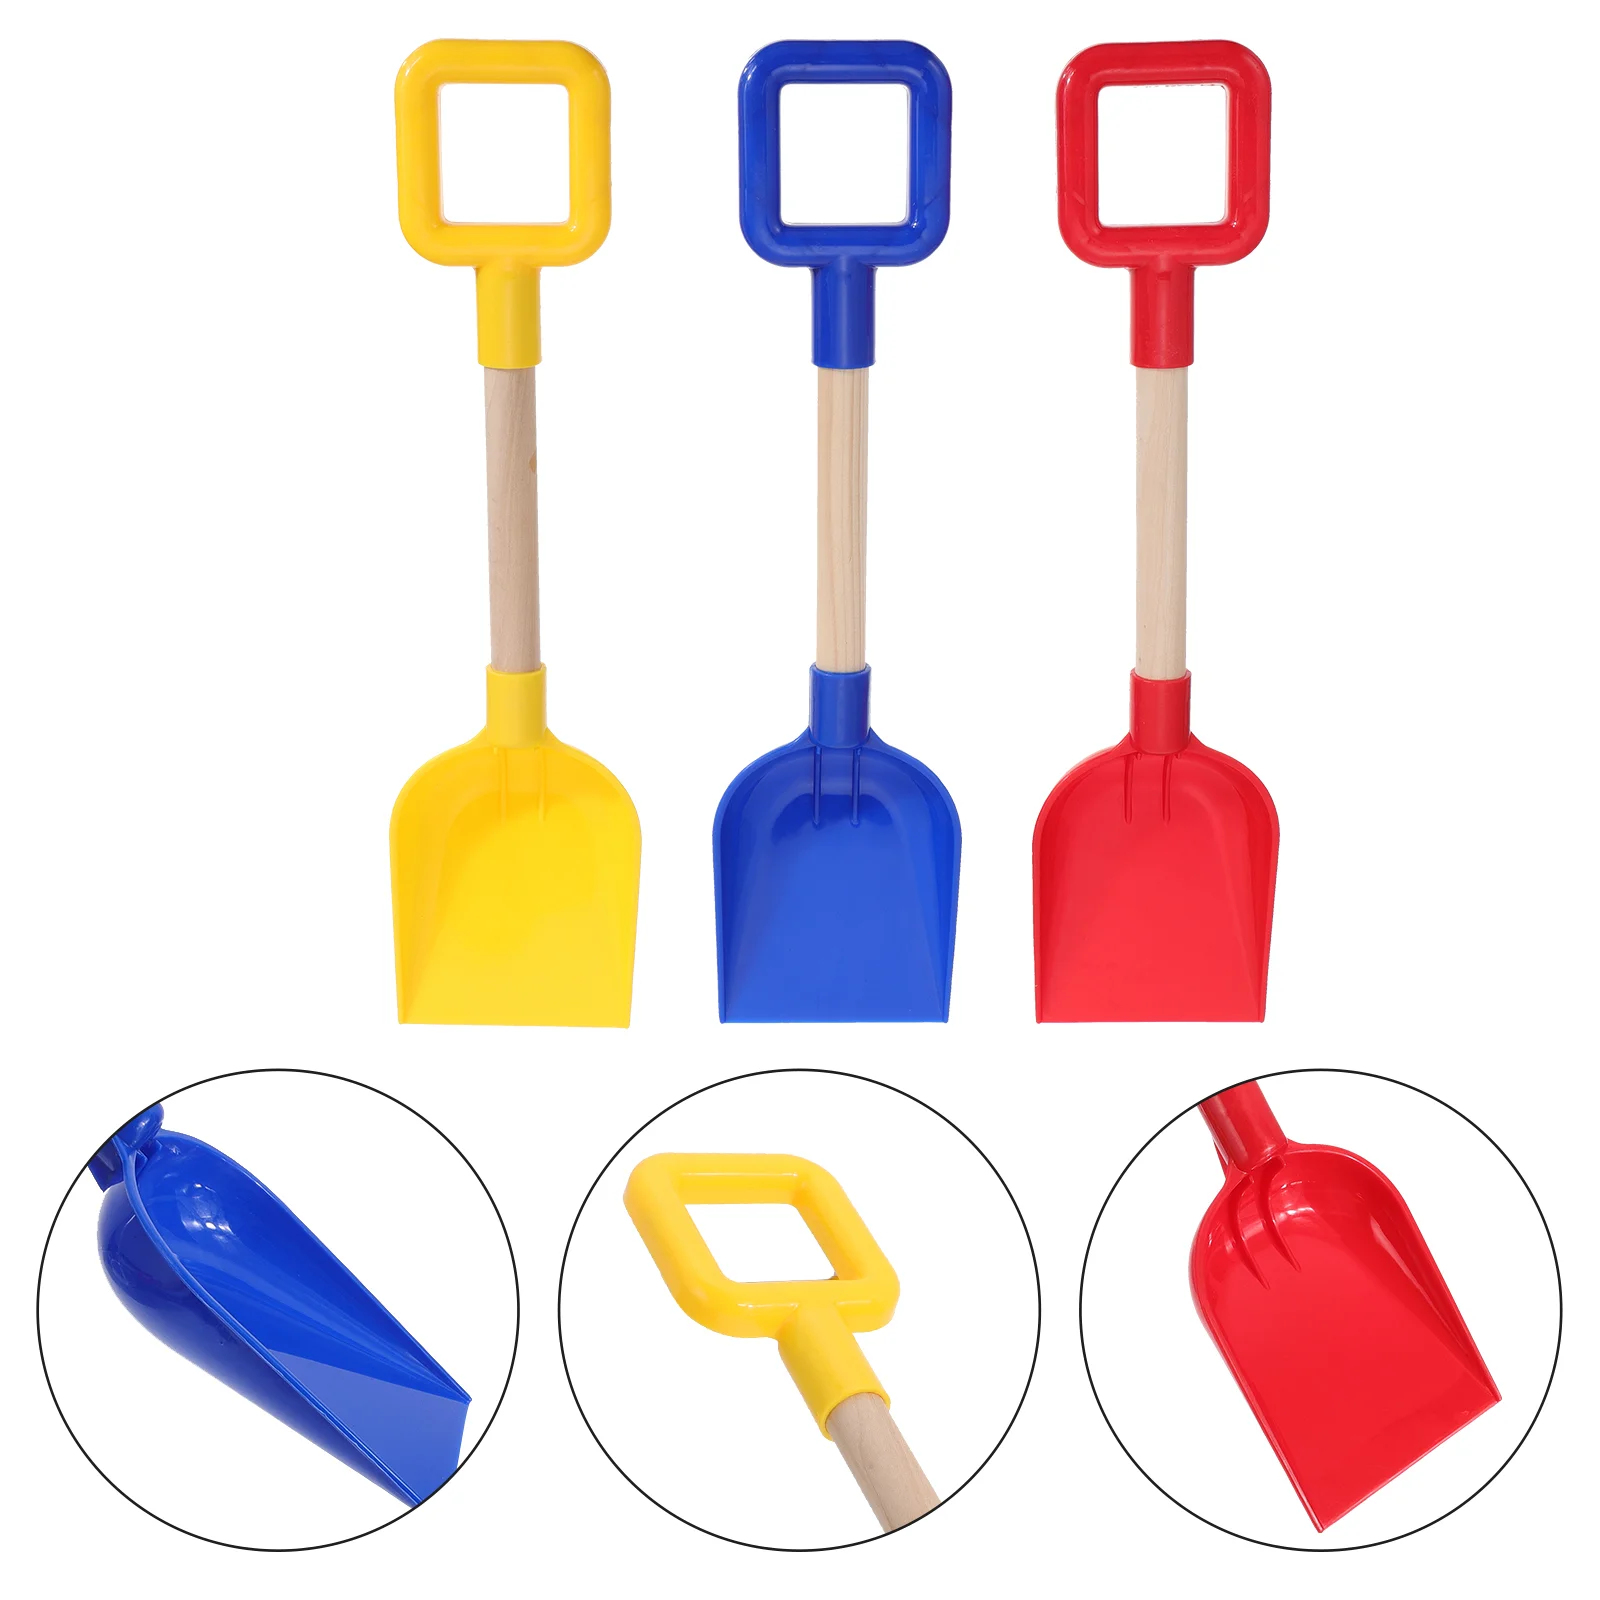 

3 Pcs Beach Playthings Children Toy Shovels Outdoor Wood Gardening Tools Planting Spades